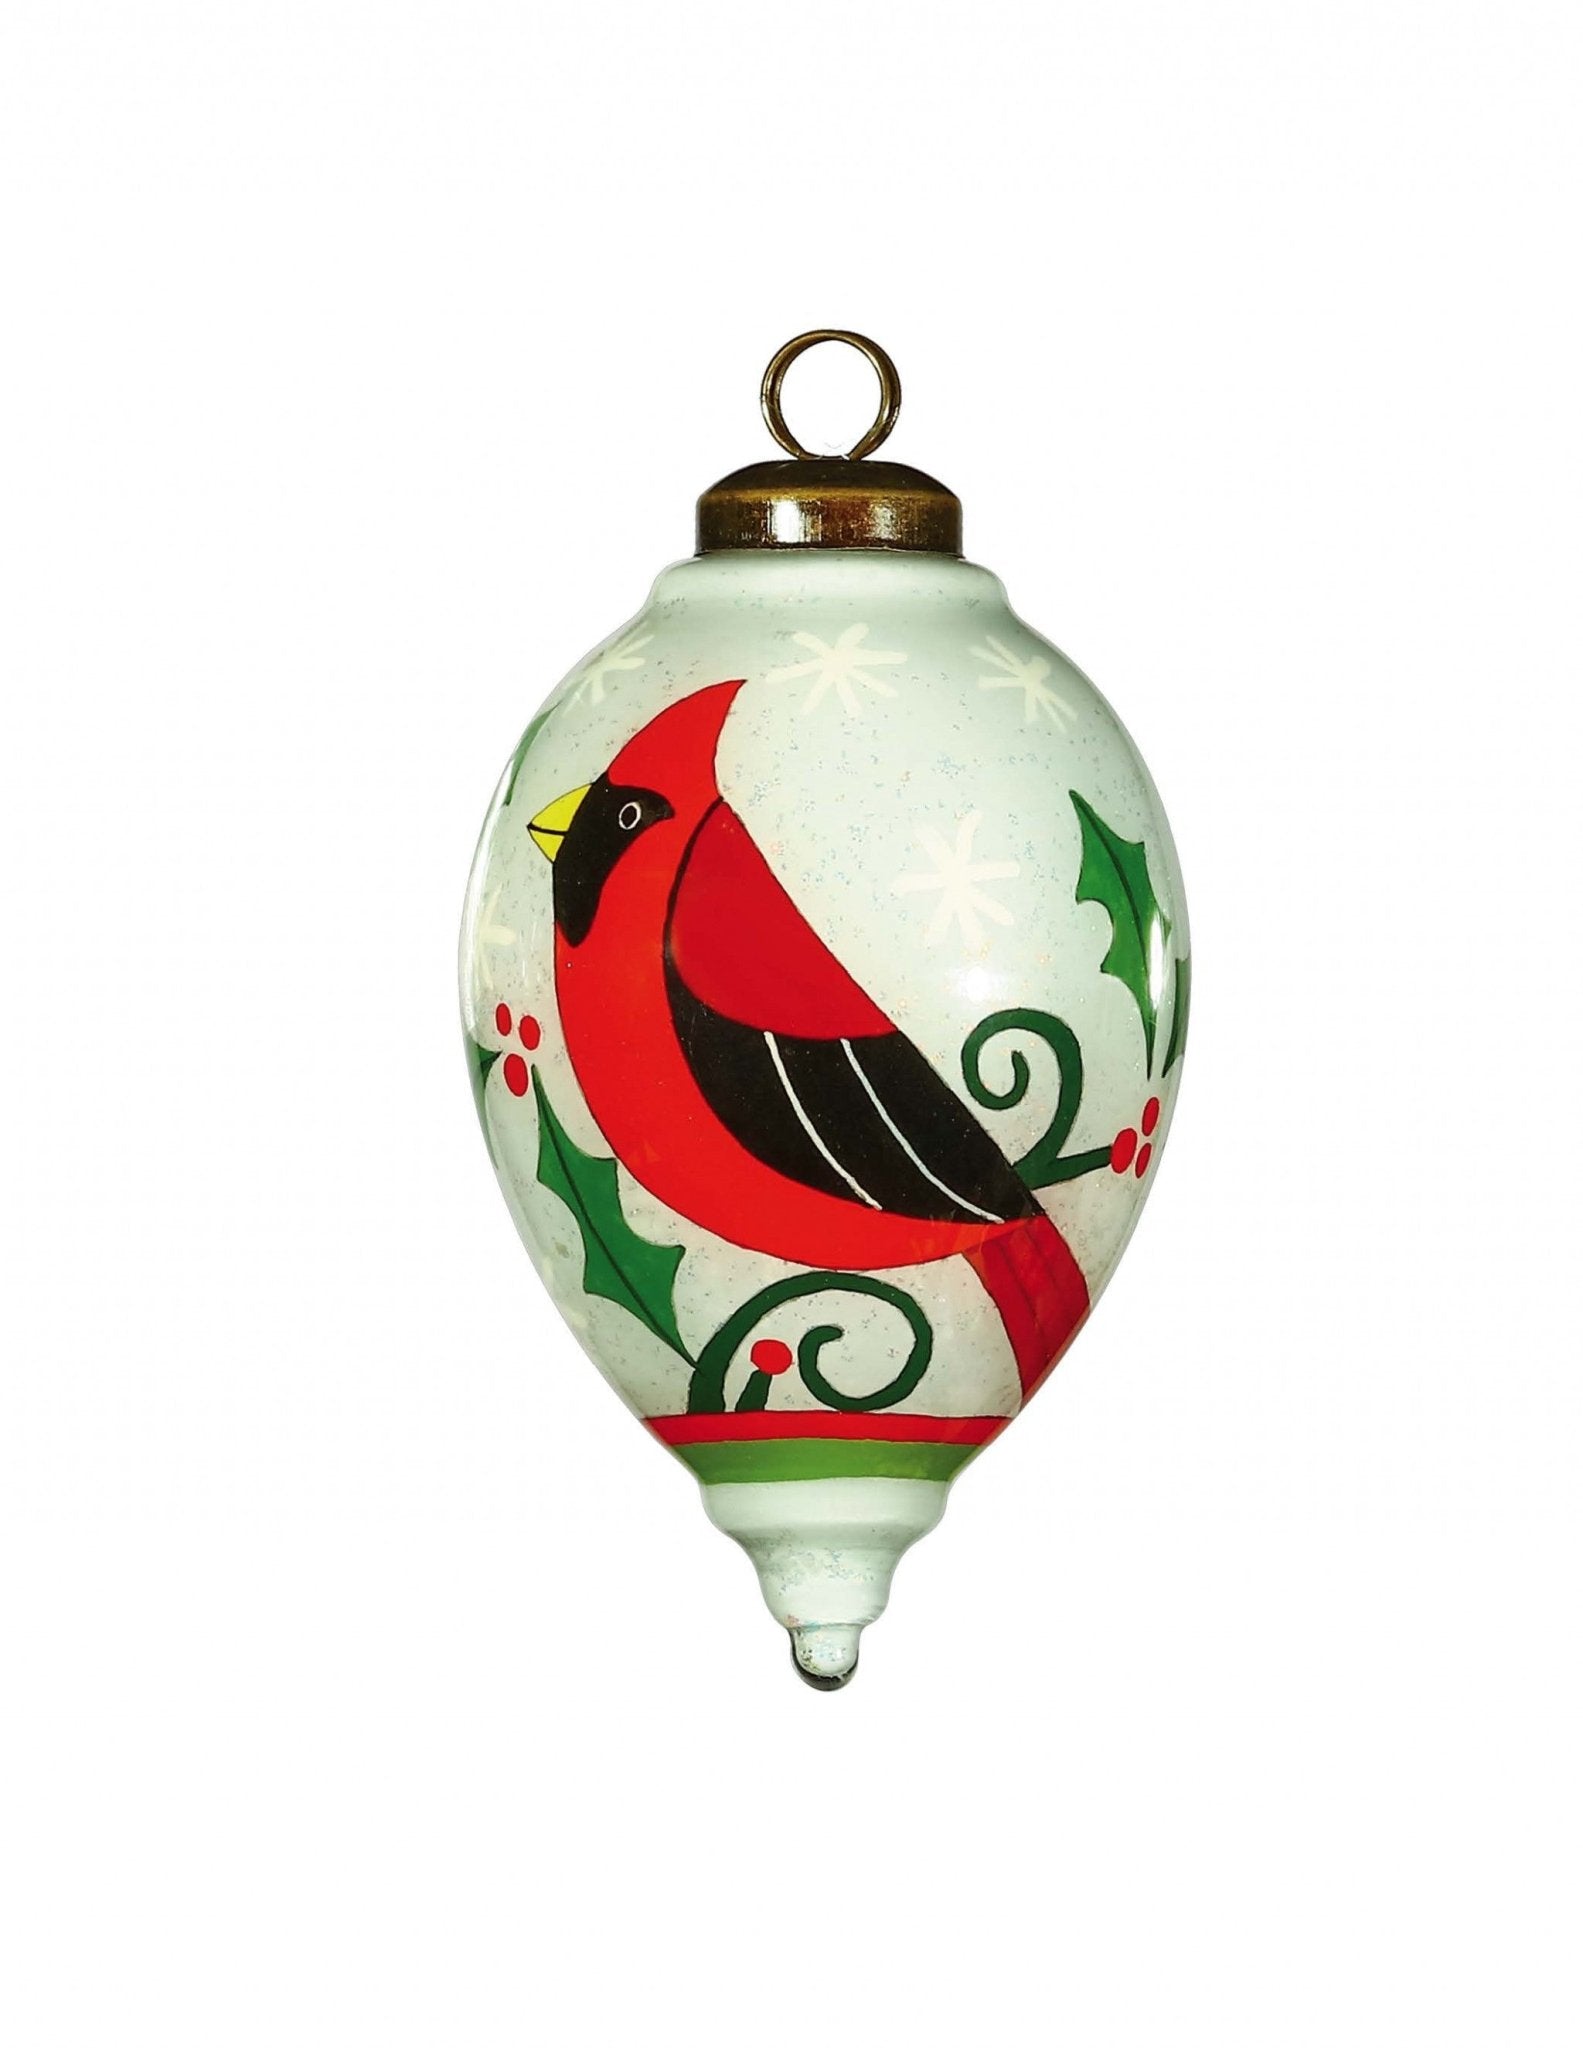 Festive-Glitter-Red-Cardinal-Hand-Painted-Mouth-Blown-Glass-Ornament-Christmas-Ornaments